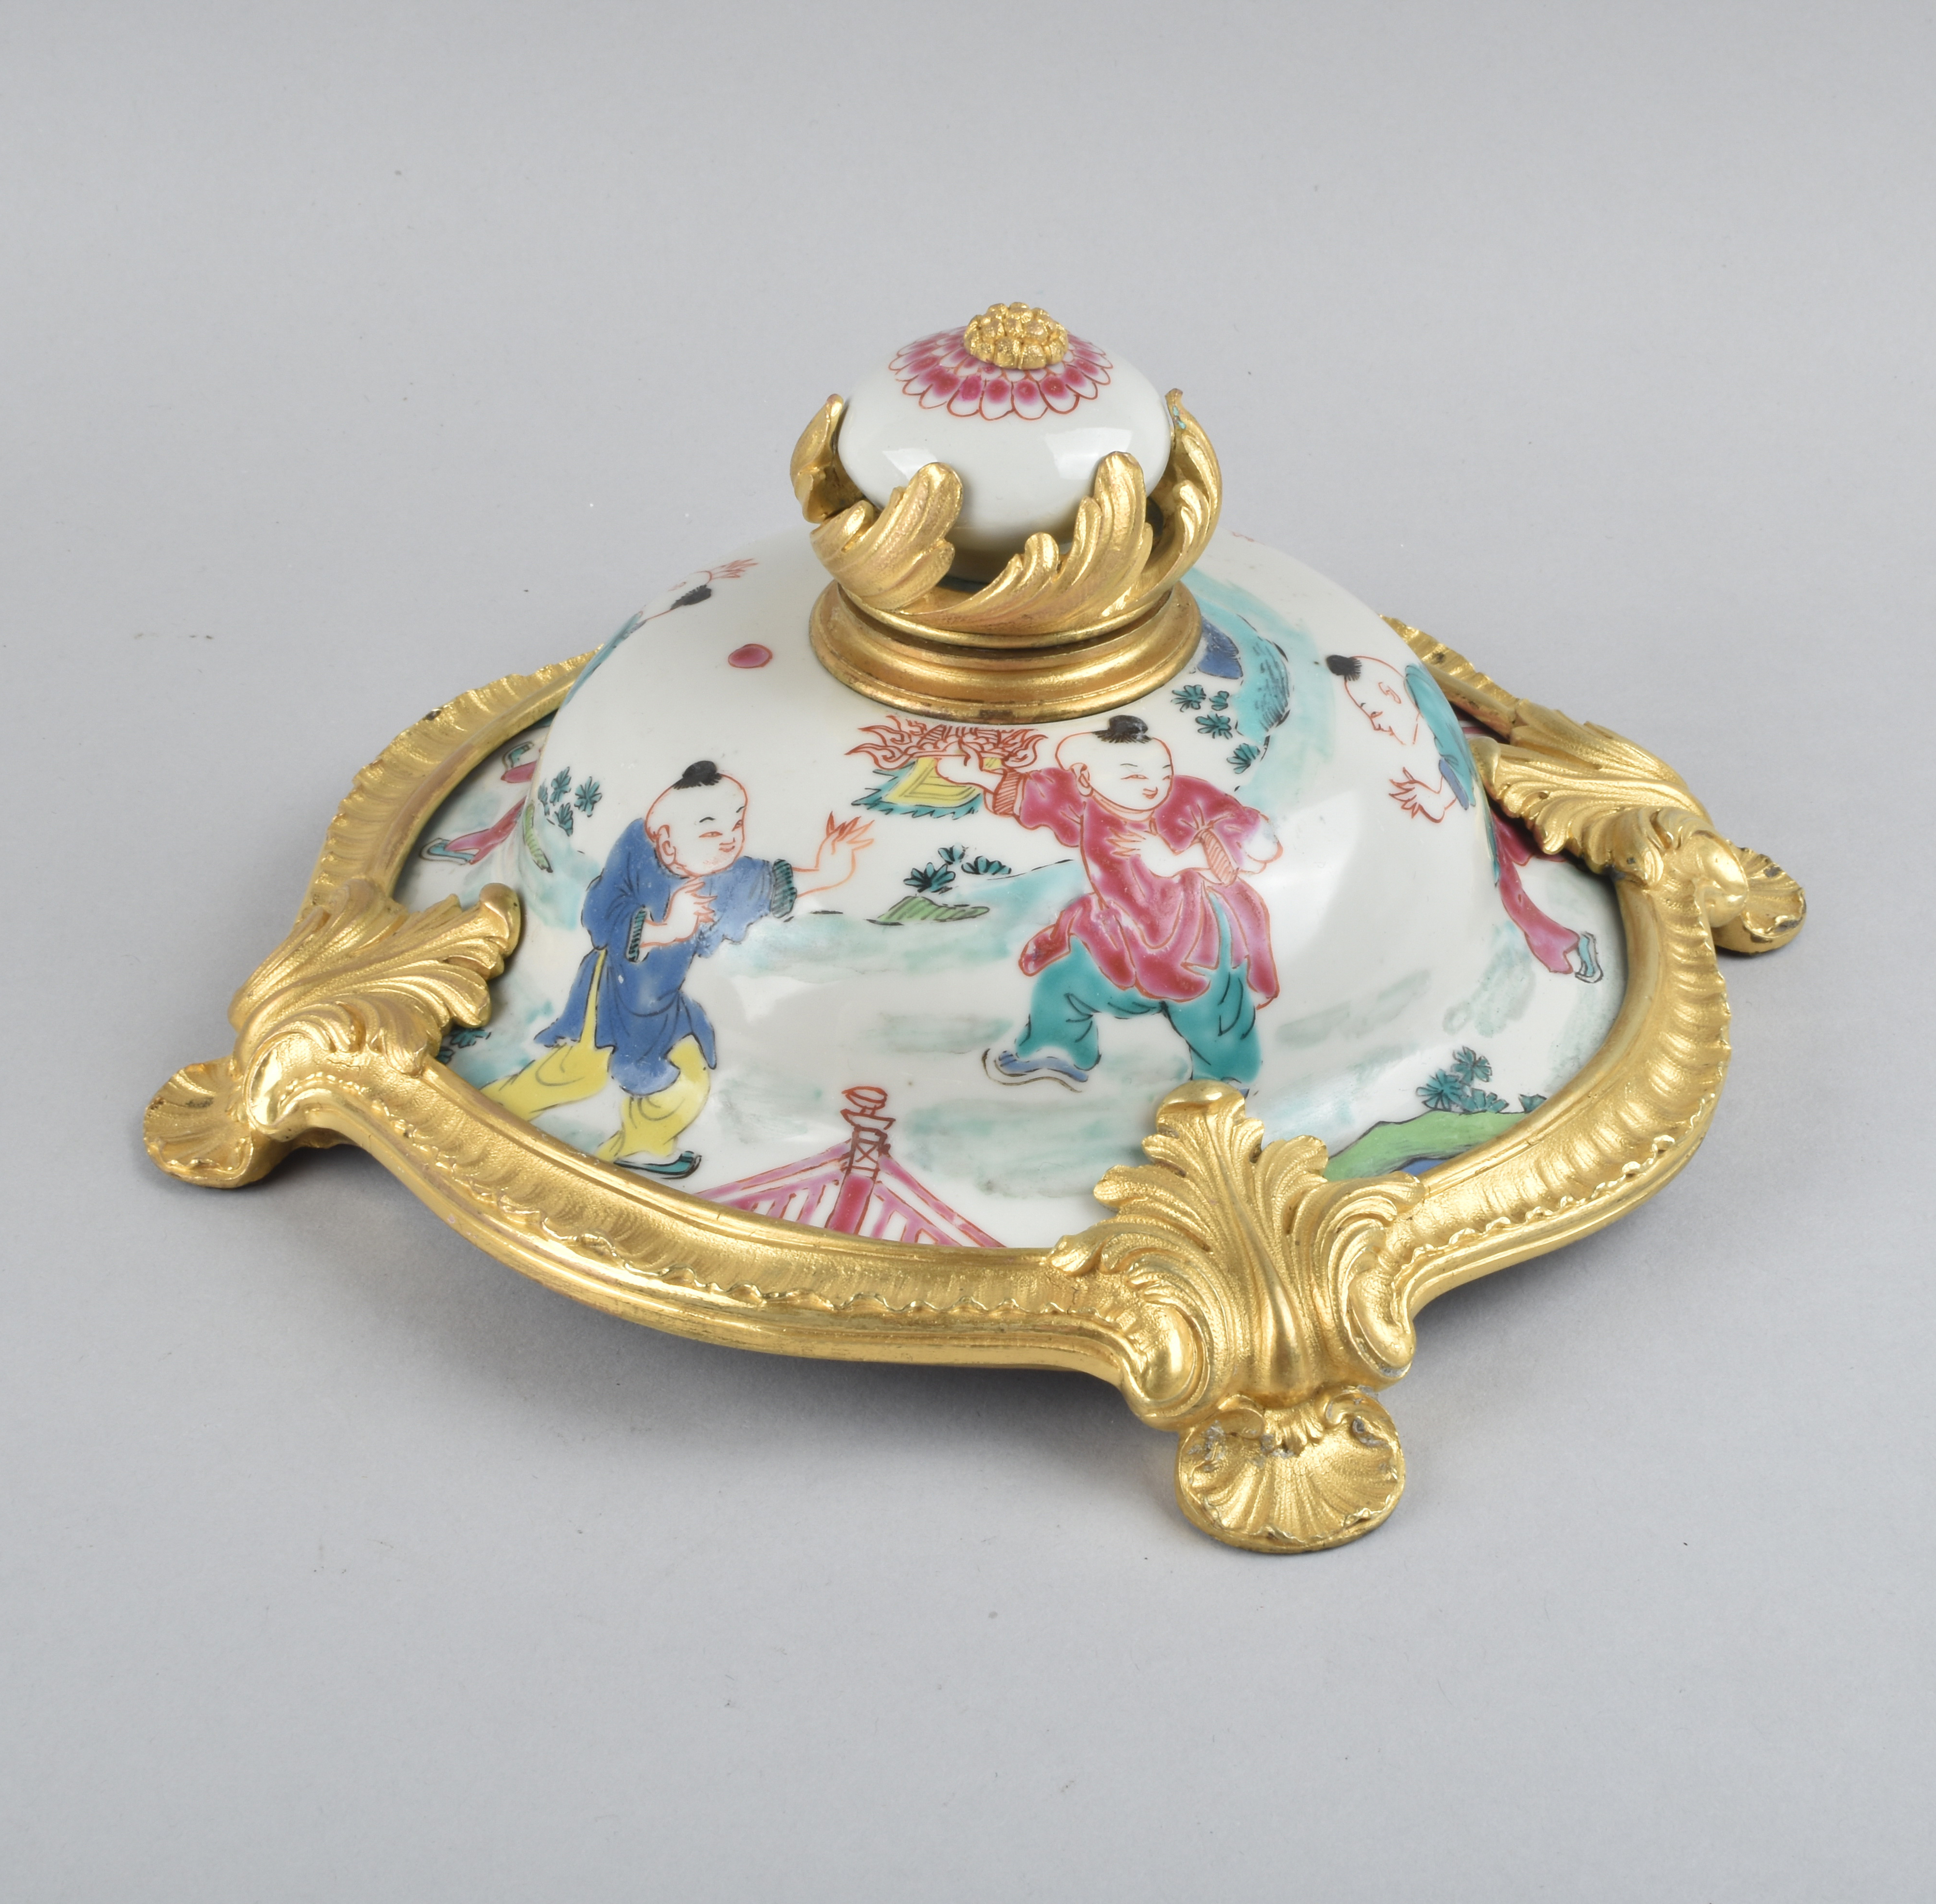 Famille rose Porcelain Yongzheng period (1723-1735) for the porcelain, 19th century for the bronze gilt, China and France